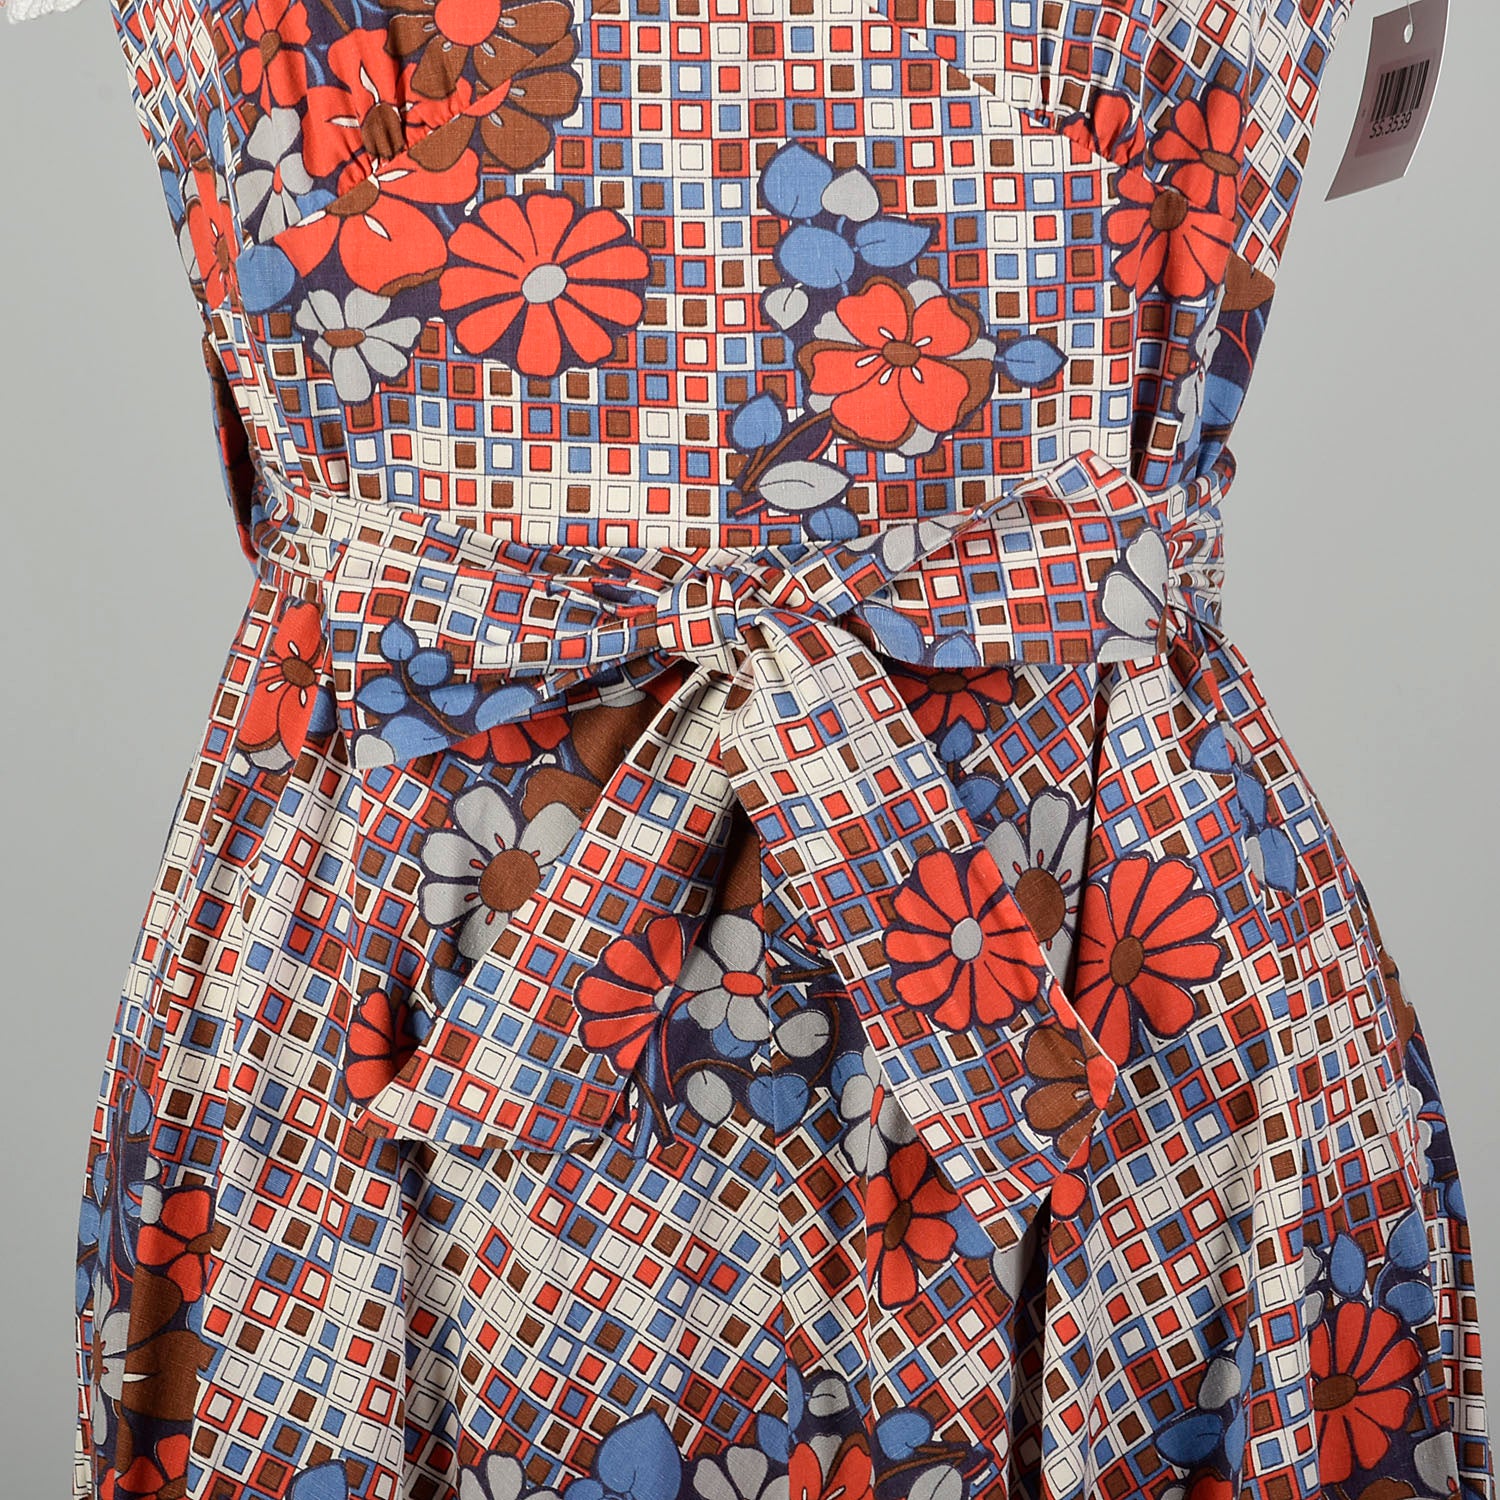 Small-Large 1960s Orange and Blue Floral and Geometric Wrap Dress